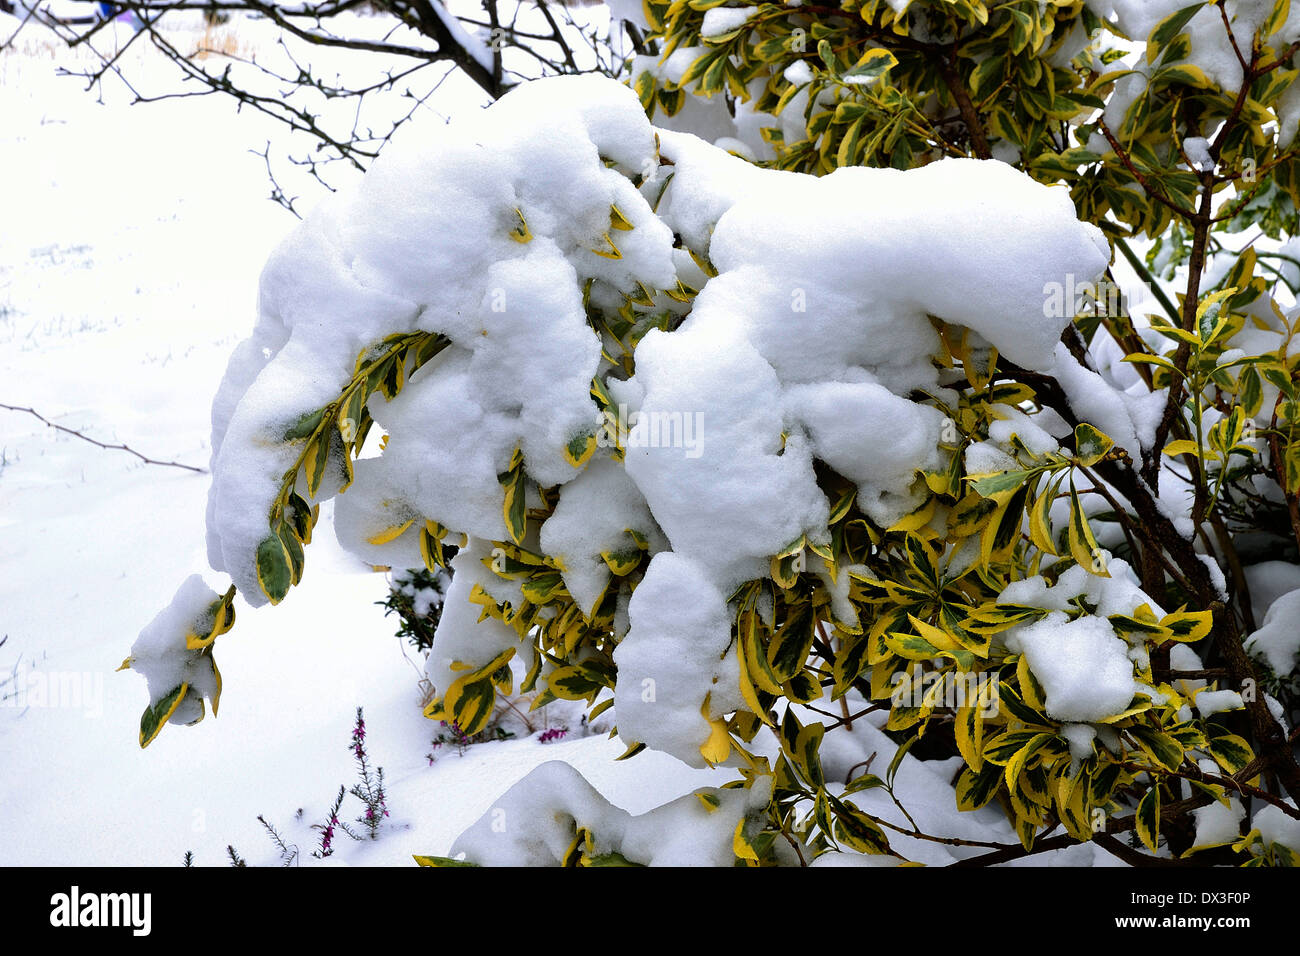 Euonymus fortunei 'Emerald n Gold' (Spindle tree), under snow in a garden (Potager de Suzanne, Le Pas, north Mayenne, FR). Stock Photo